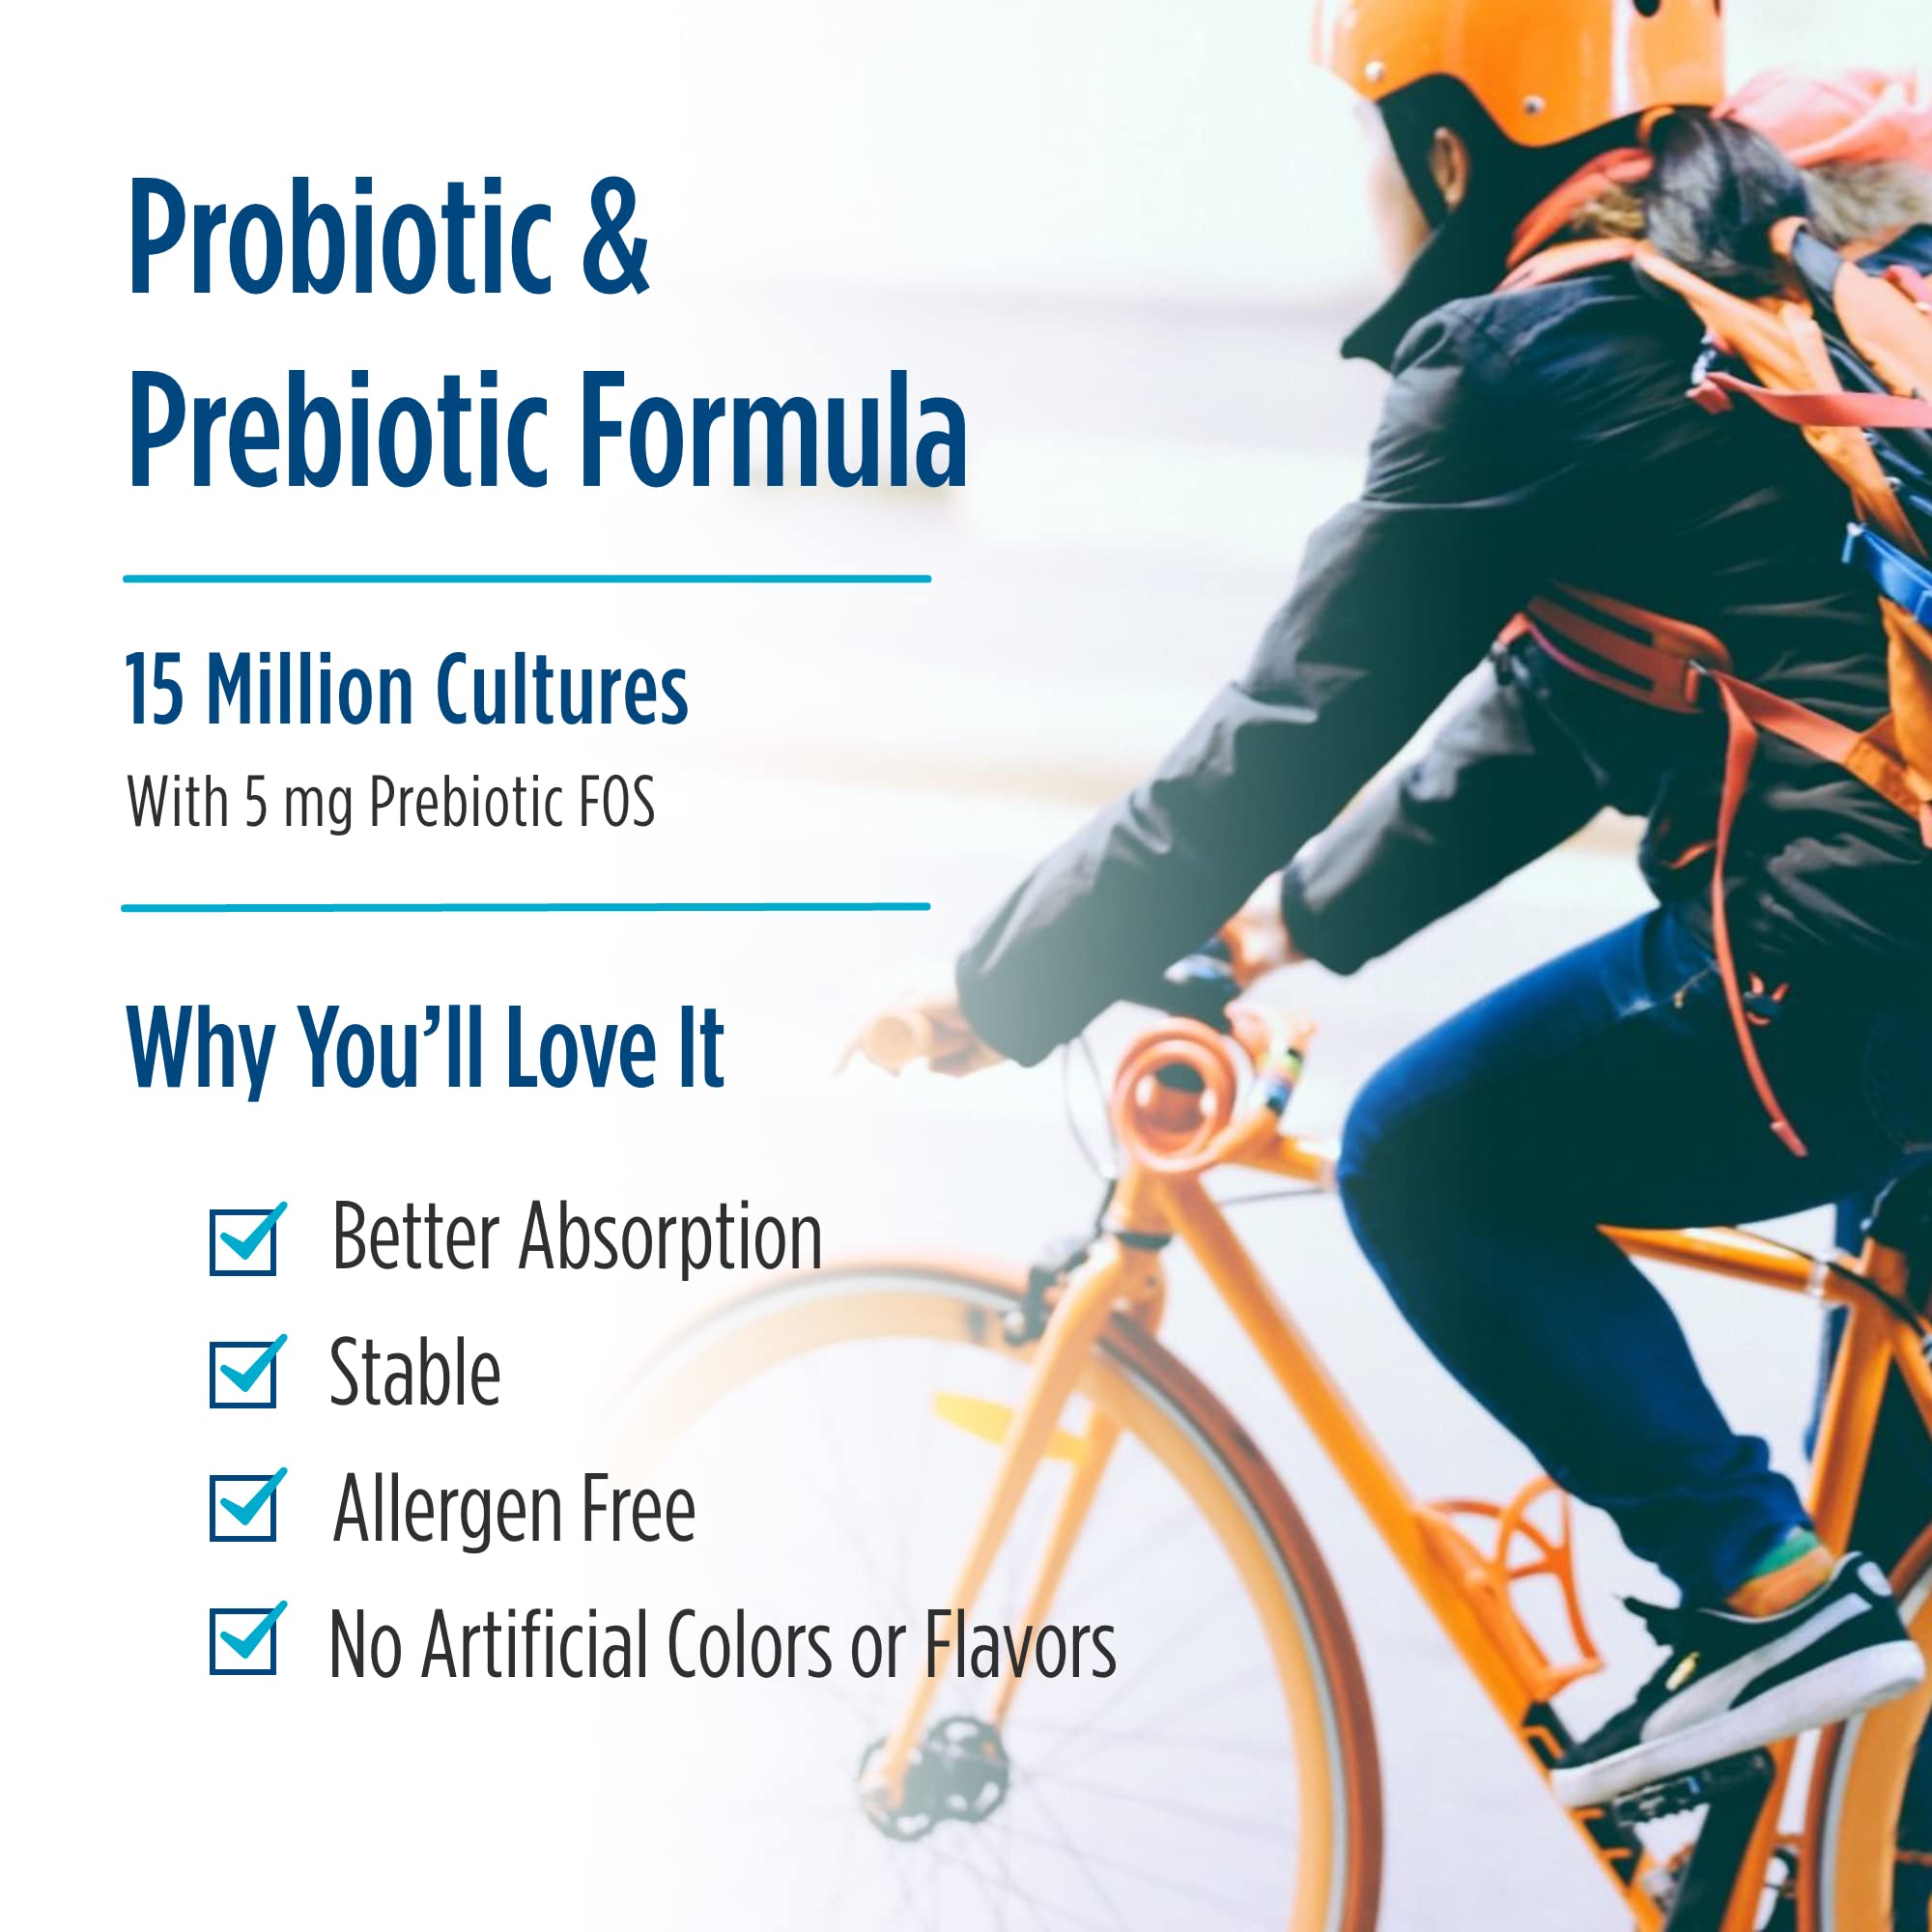 Nordic Naturals Flora Probiotic Comfort - Probiotic for Intestinal Health, For Those With Digestive Issues, 30 Capsules